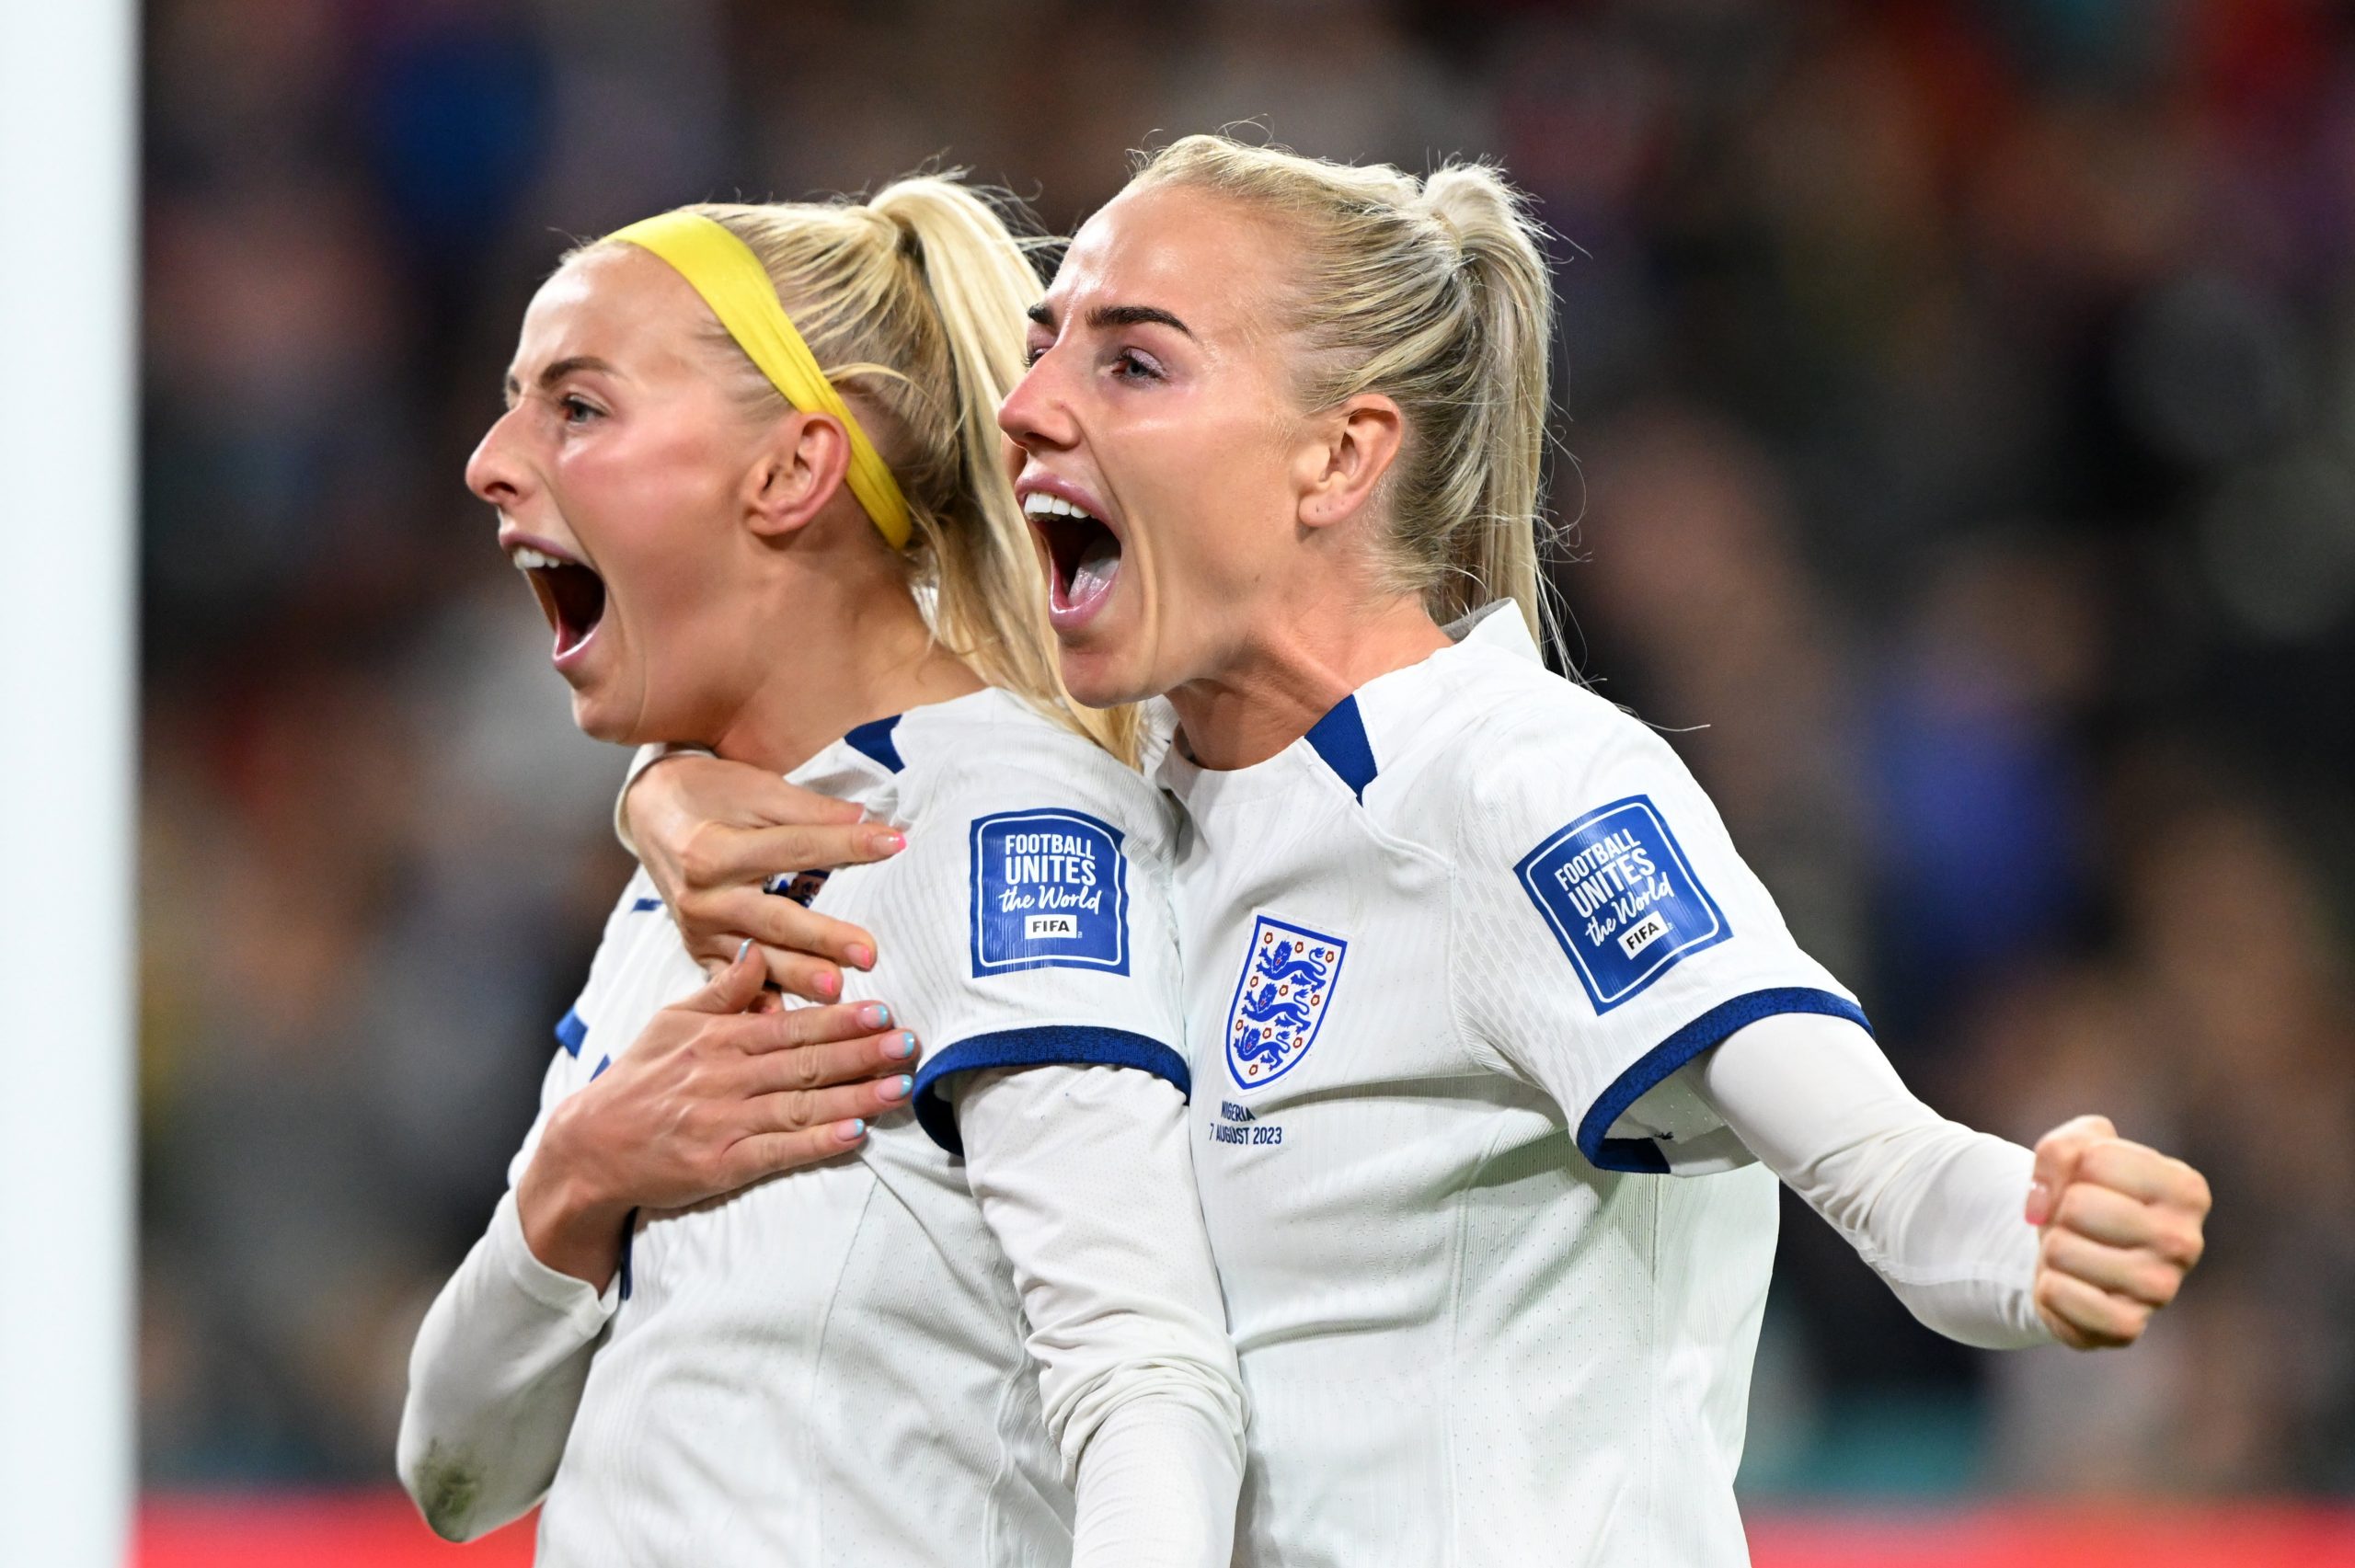 England vs Nigeria LIVE: Score and updates from Women’s World Cup as Lionesses being frustrated